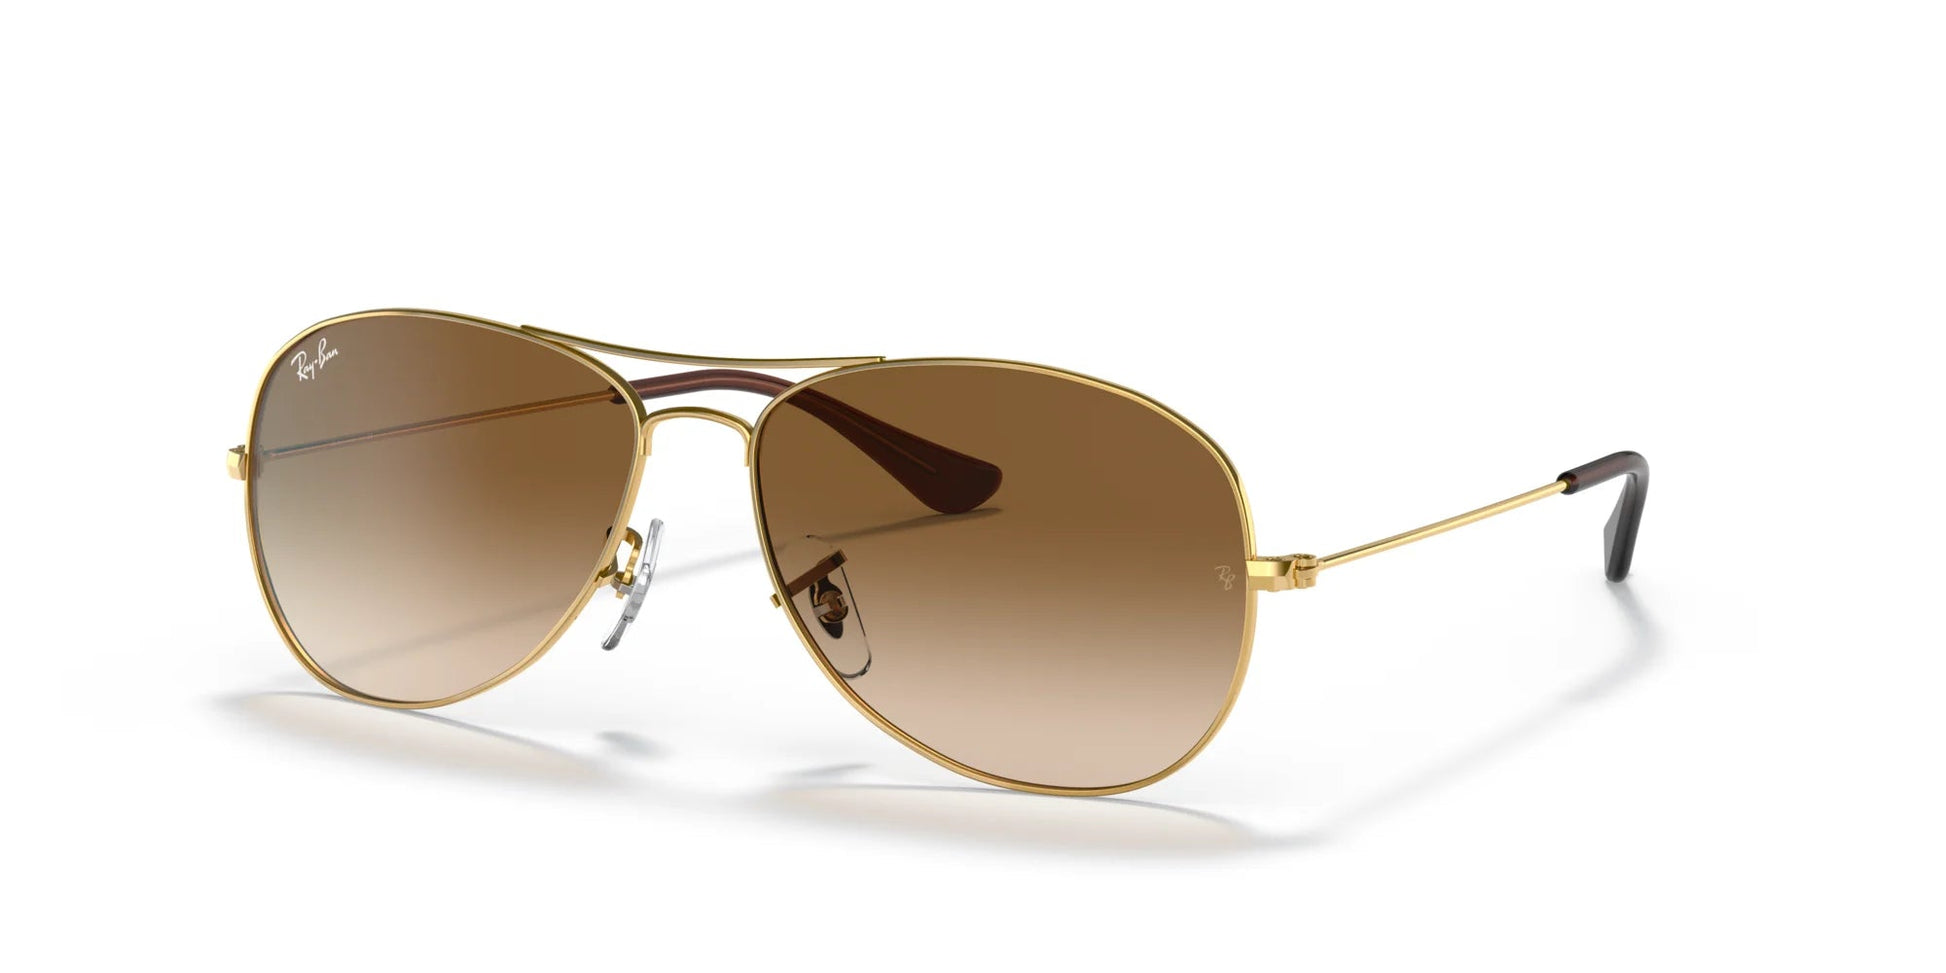 Ray-Ban COCKPIT RB3362 Sunglasses Gold / Light Brown Gradient